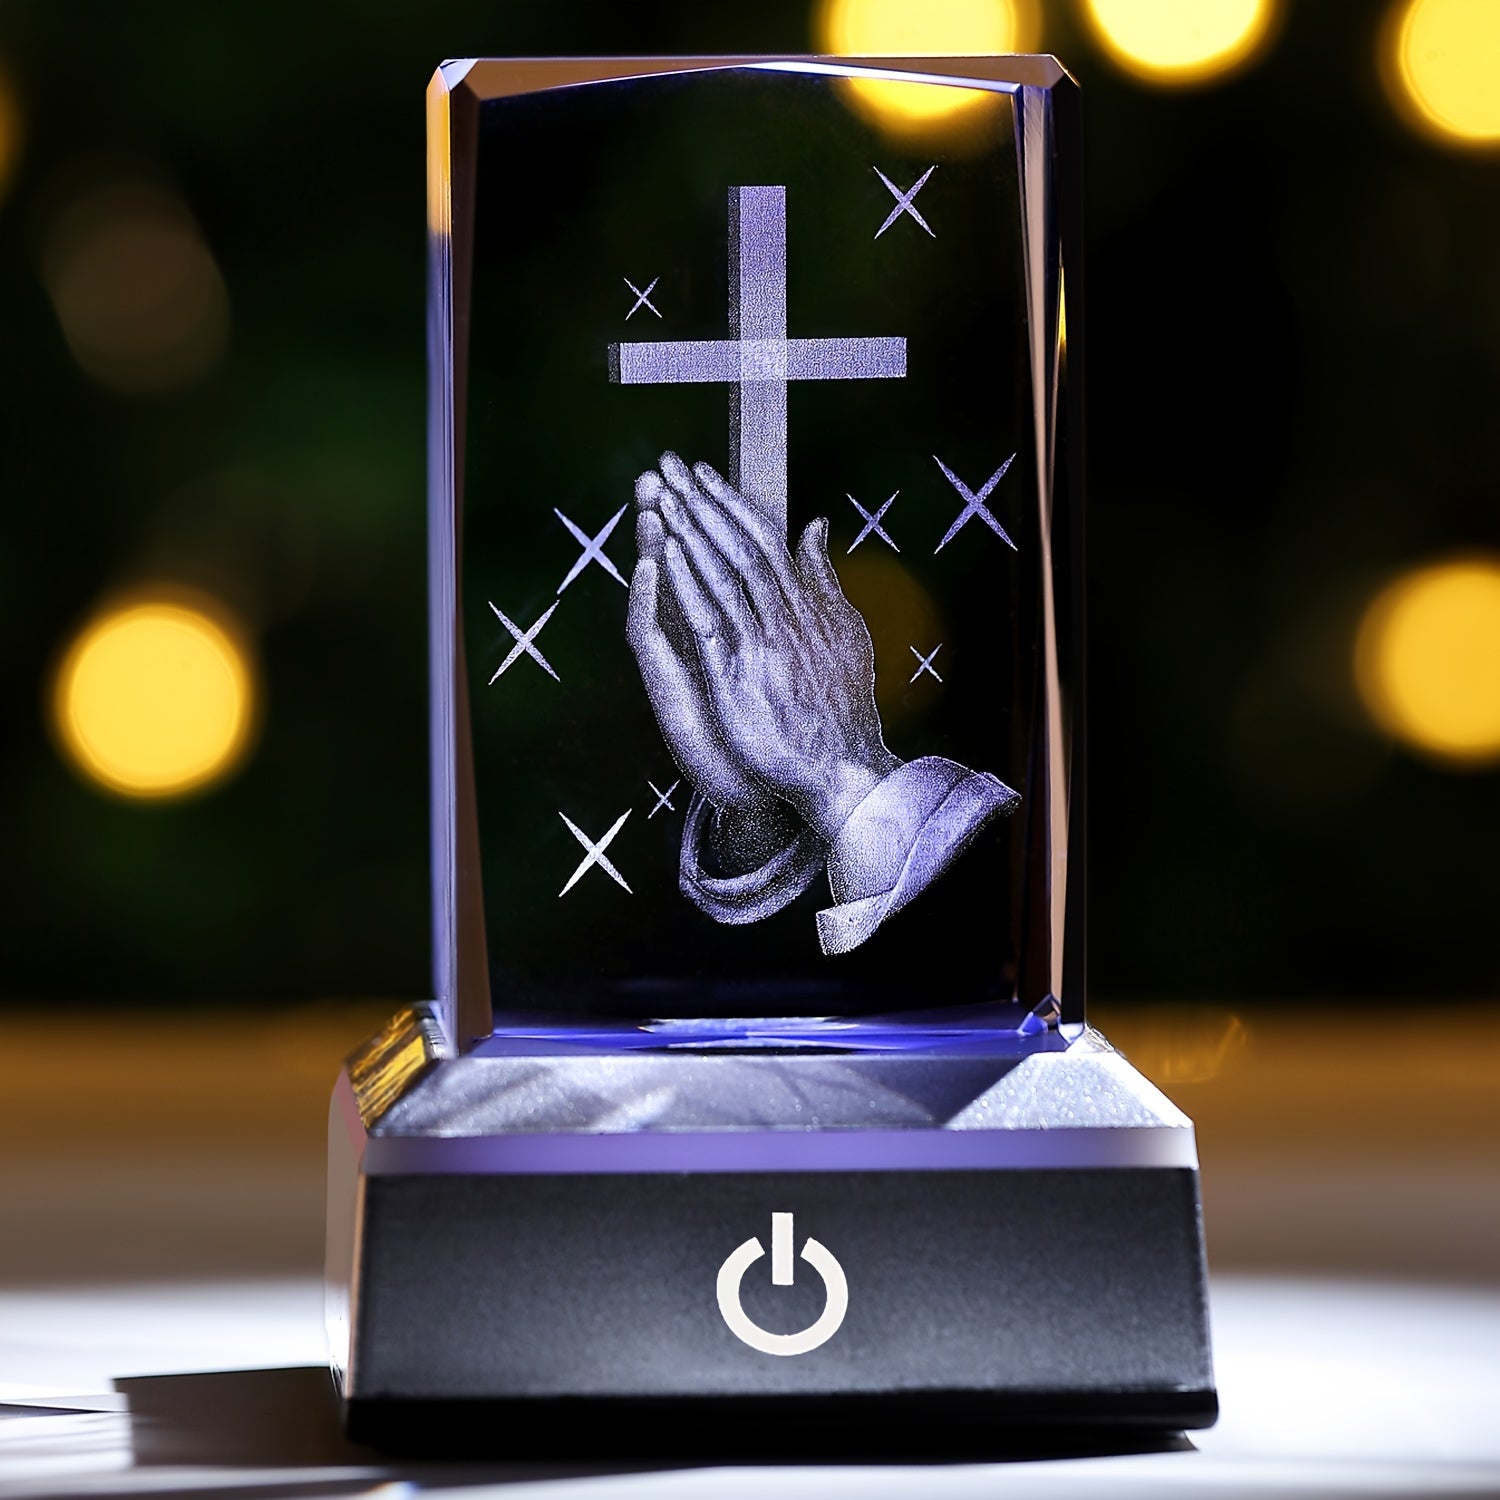 1pc 3D Praying Hands & A Cross/Angel/Dove/Virgin Mary Interior Carved Crystal Figurine Multi-color Night Light Christian Gift Idea Connection USB, ,3.15 * 1.97 * 1.97 In claimedbygoddesigns